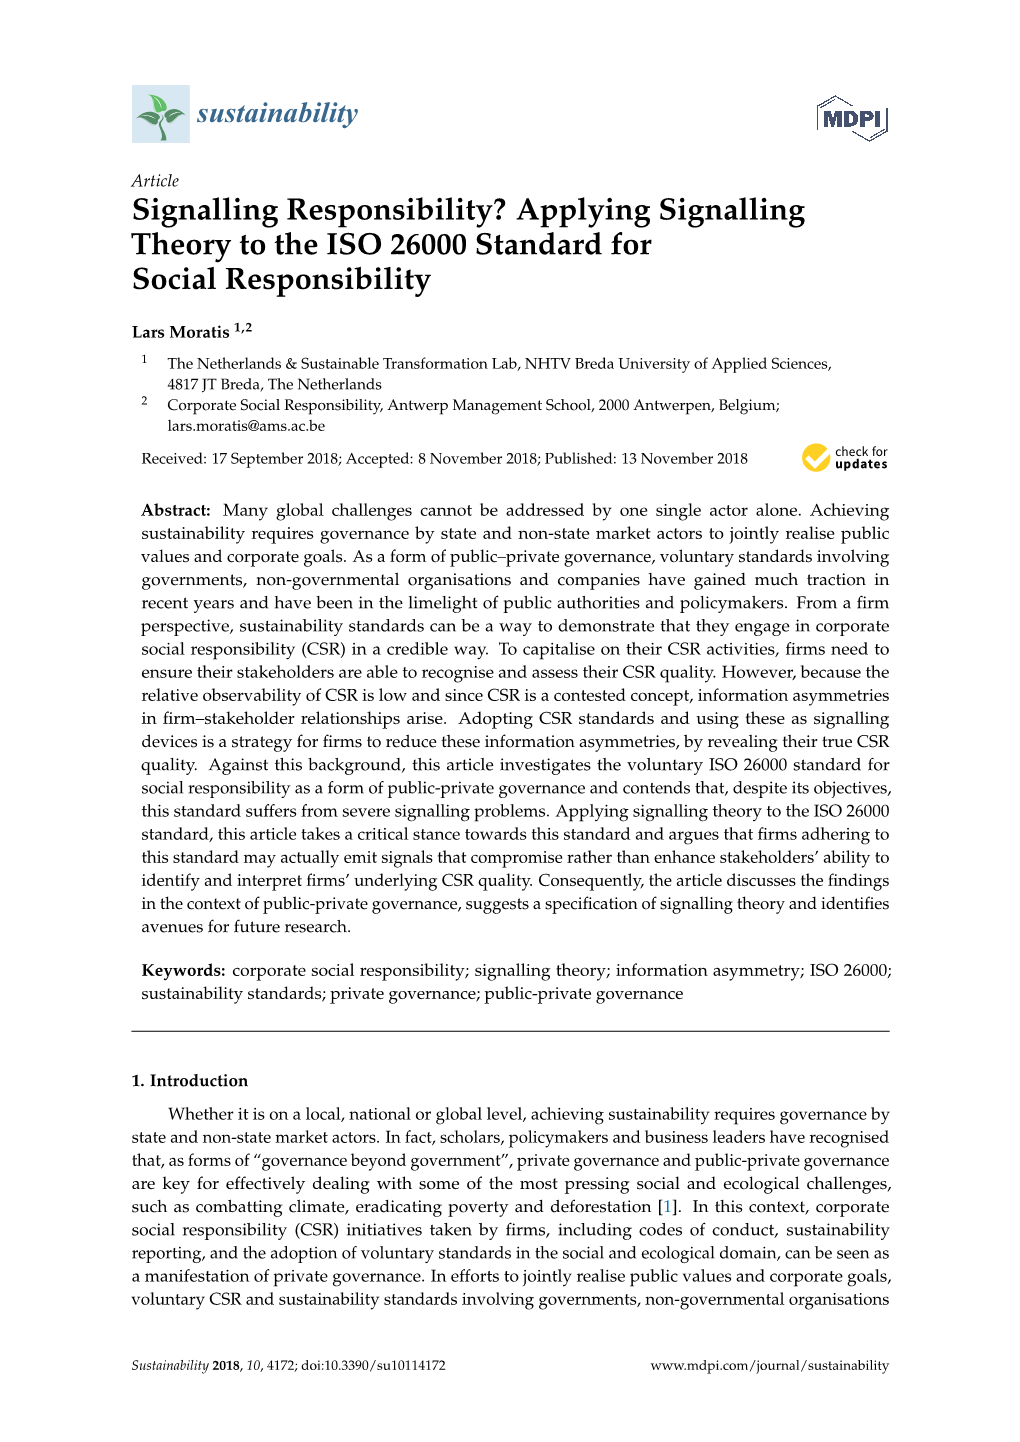 Applying Signalling Theory to the ISO 26000 Standard for Social Responsibility